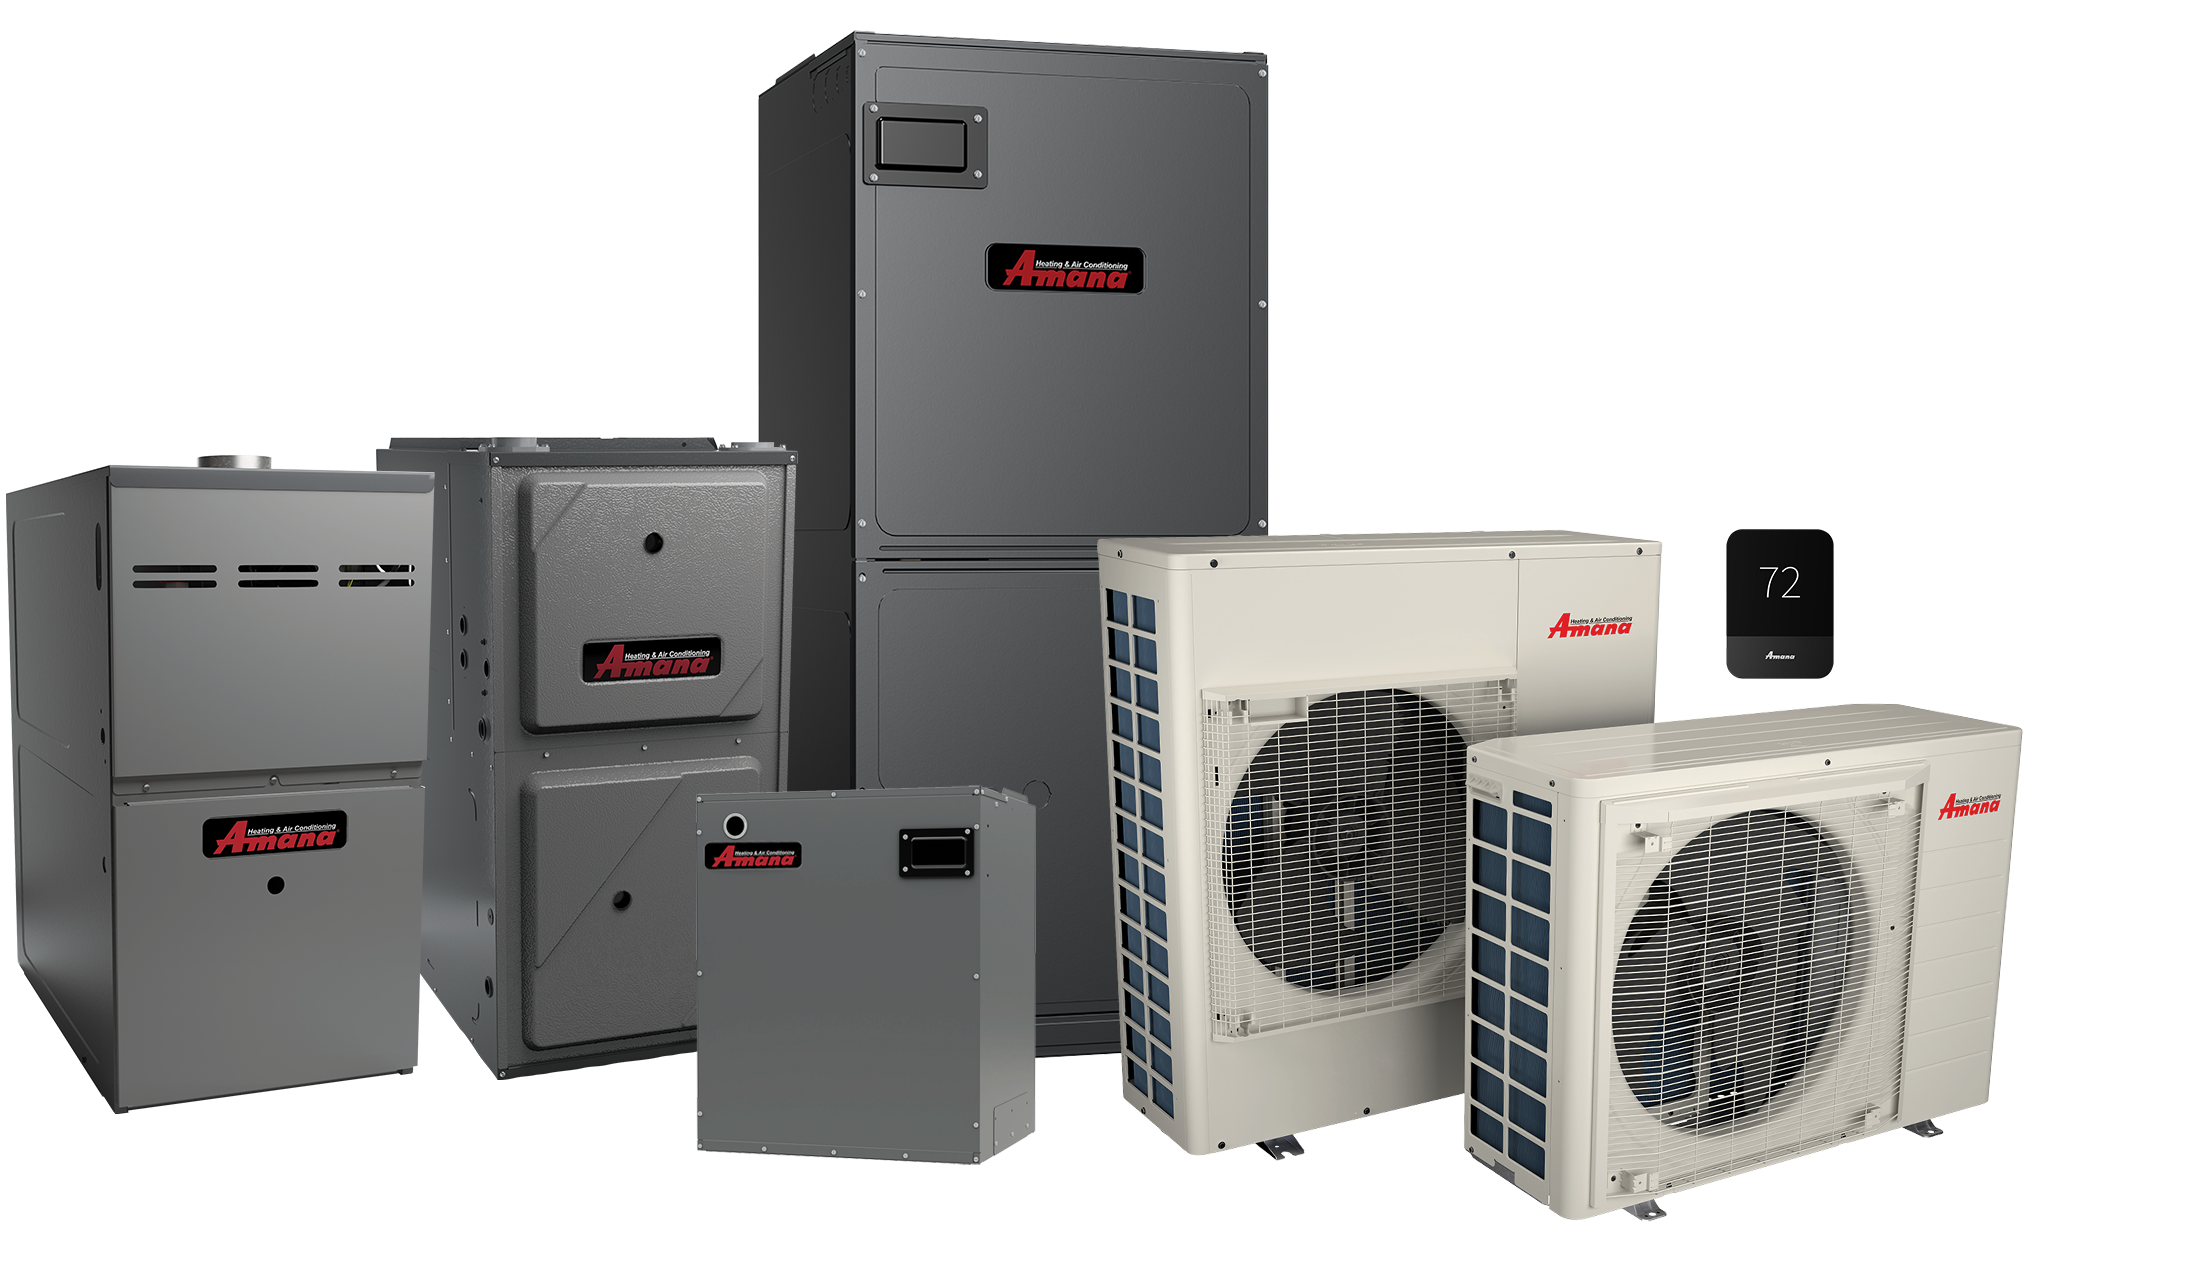 Amana brand heating and cooling equipment